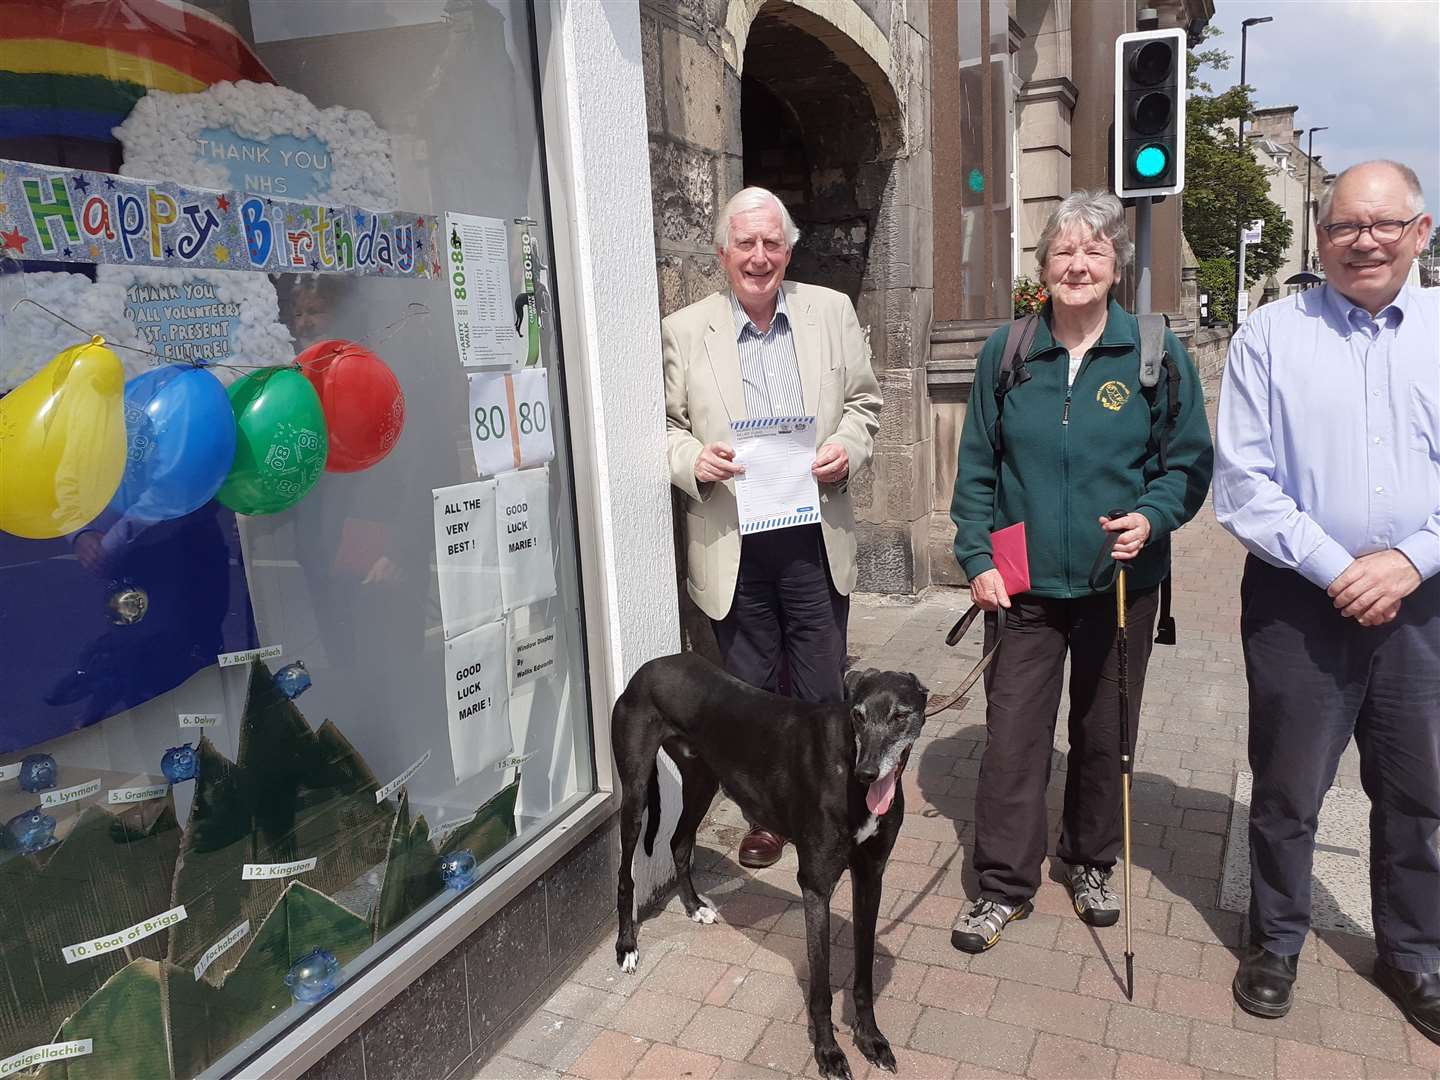 Moray Emergency Relief Fund trustees Major General Seymour Monro and Alan James with Marie Jacques and Ziggy, admiring the window display at Moray Firth Credit Union.